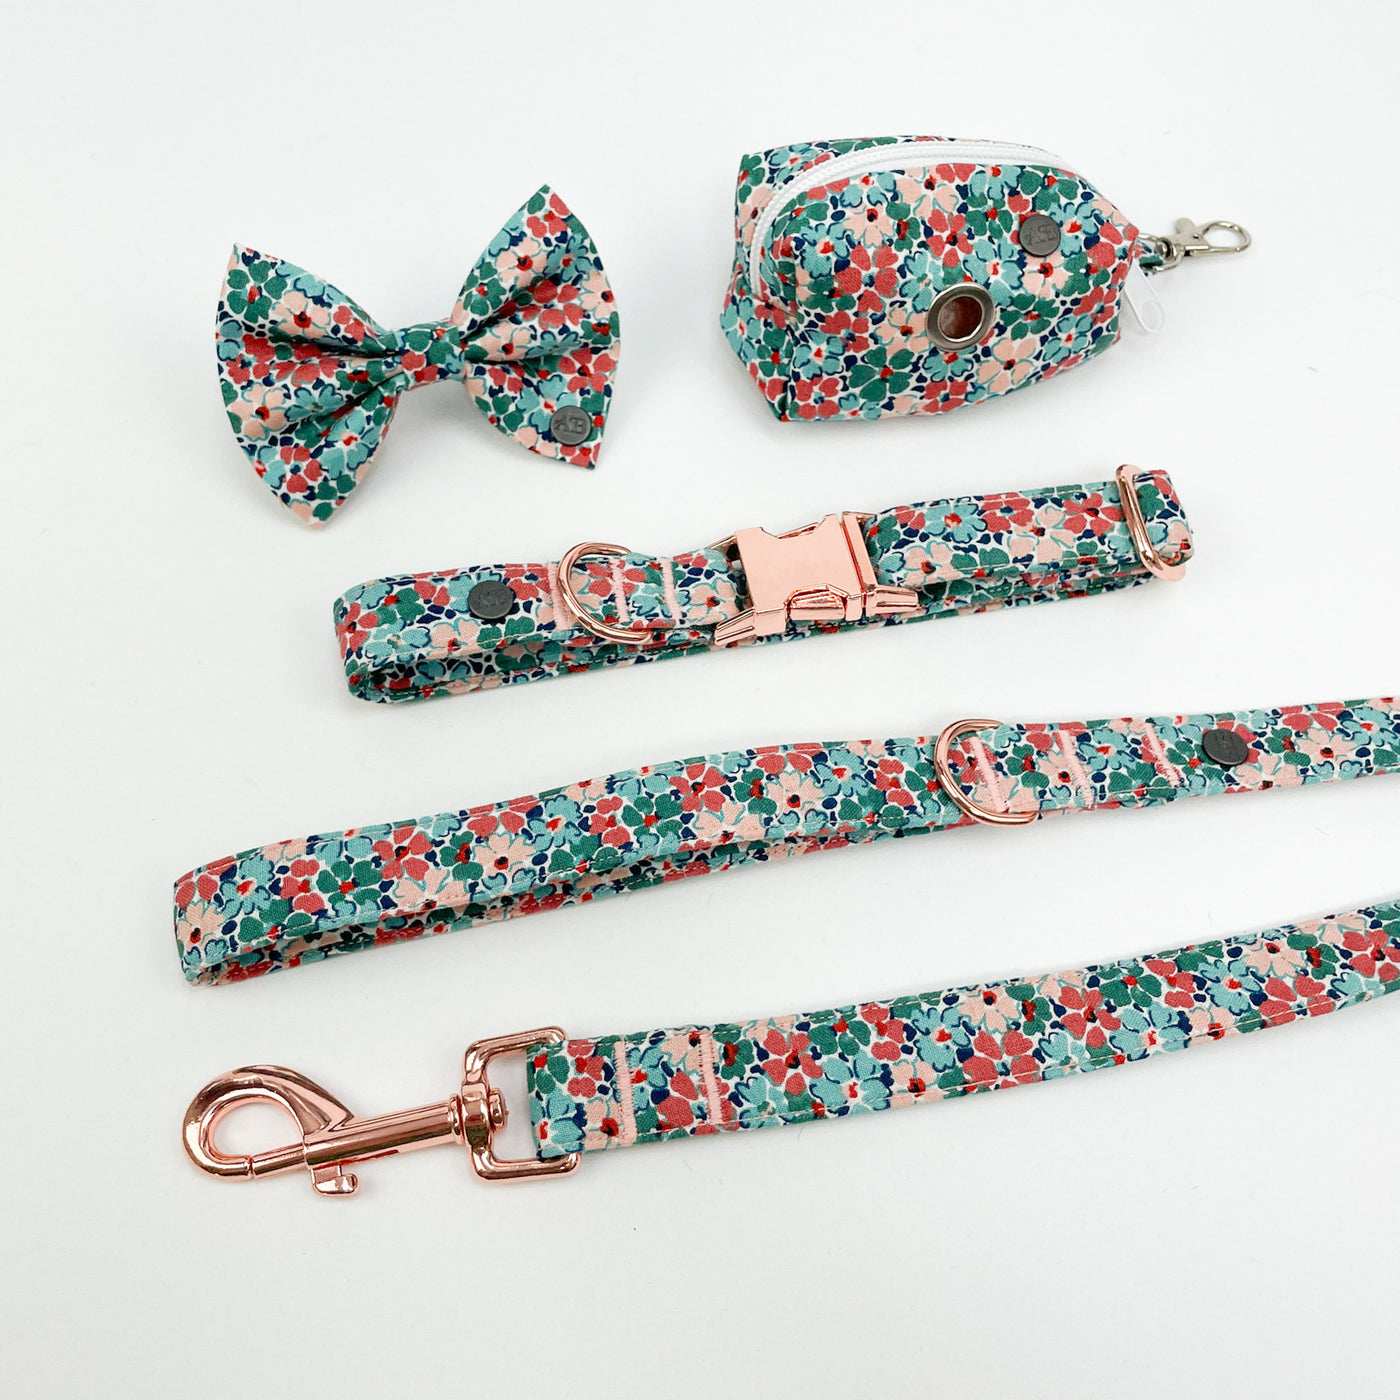 Liberty winter floral collar and lead set with bow and poop bag holder